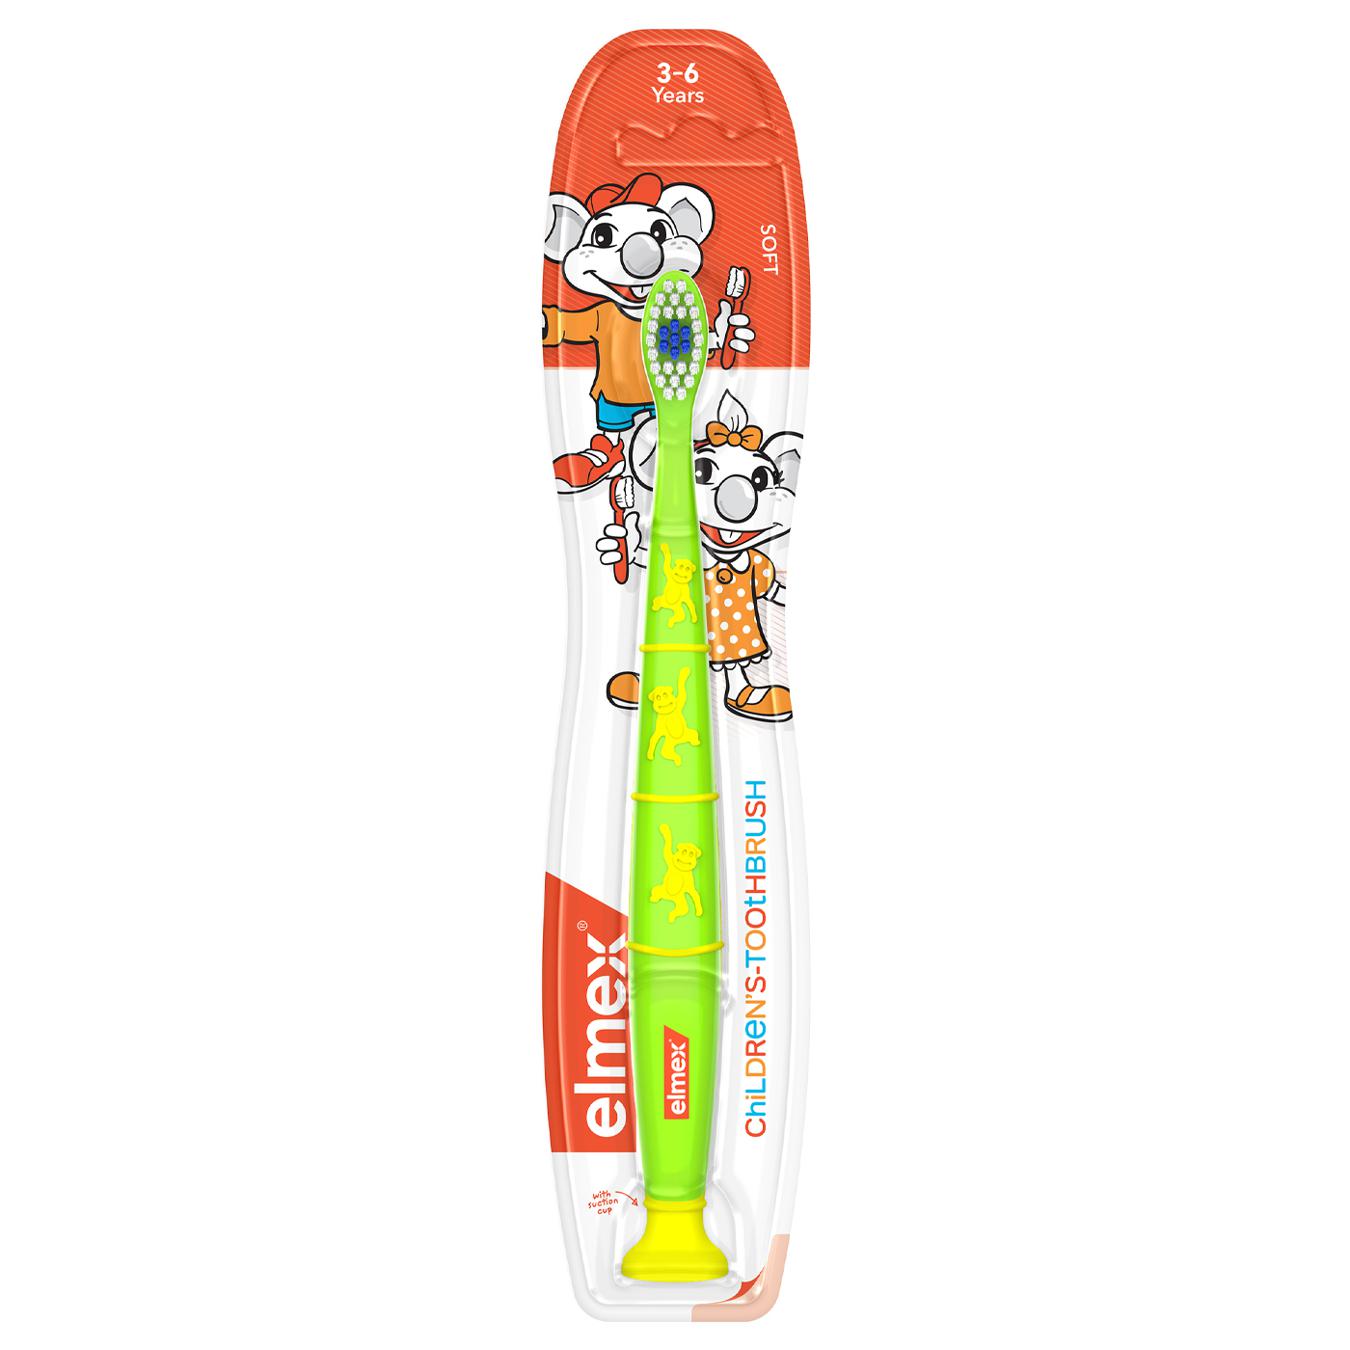 Elmex toothbrush for children from 3 to 6 years is soft